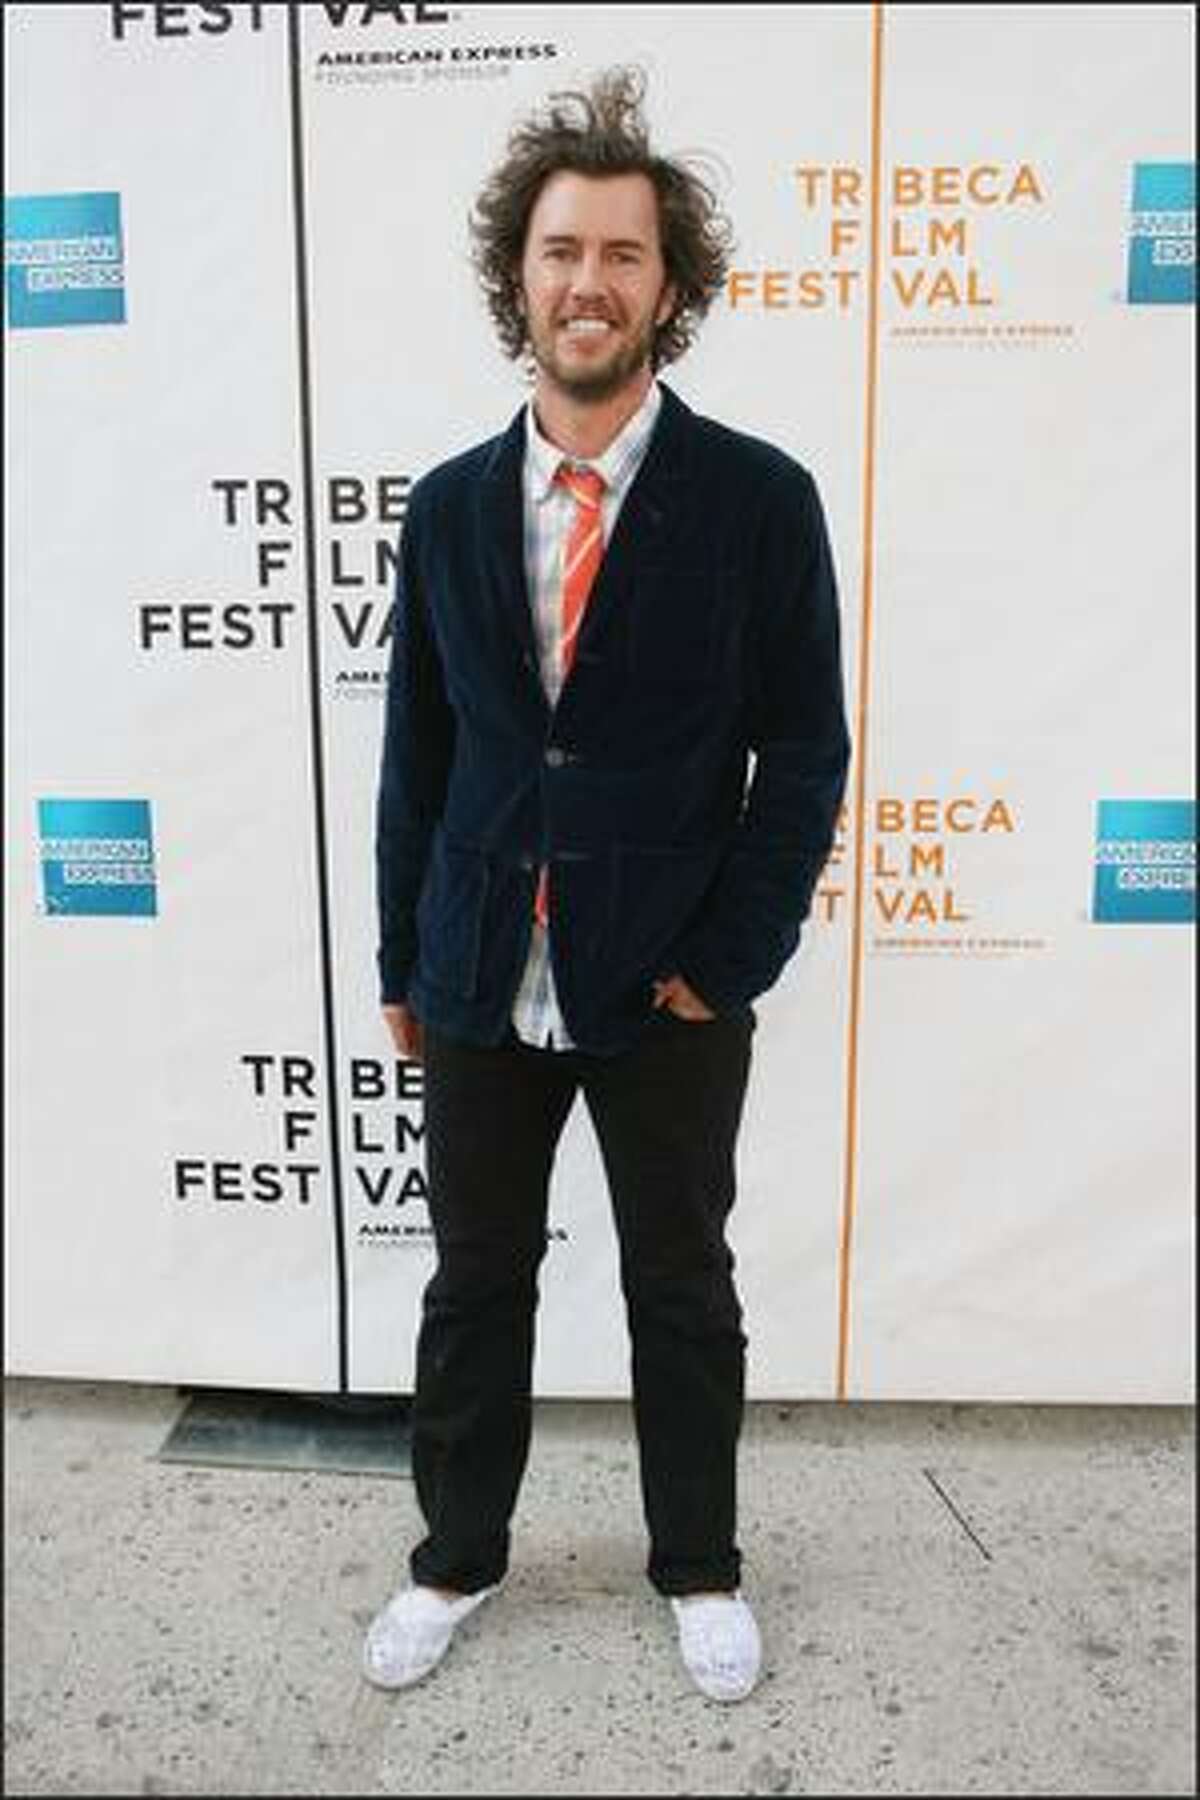 Director Blake Mycoskie attends the premiere of the shorts program "All Truisms" during the 2008 Tribeca Film Festival in New York.